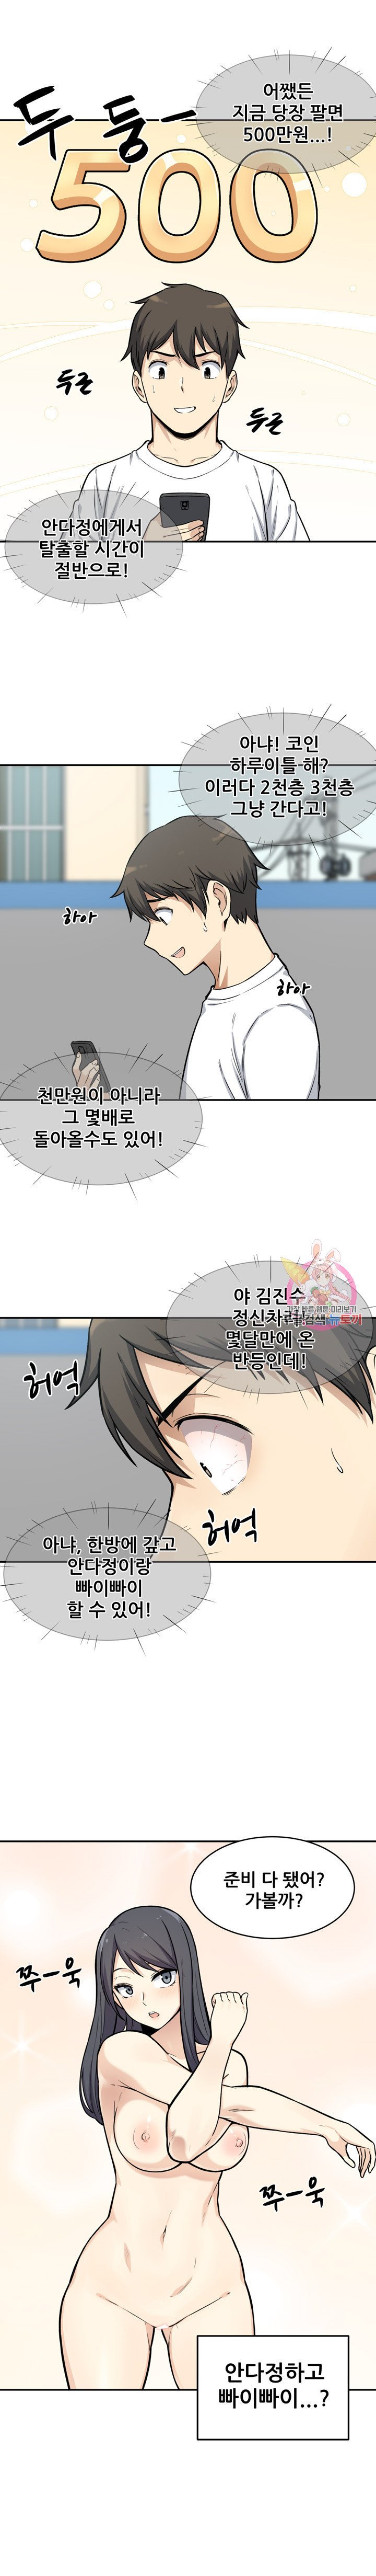 the-ark-is-me-raw-chap-32-5